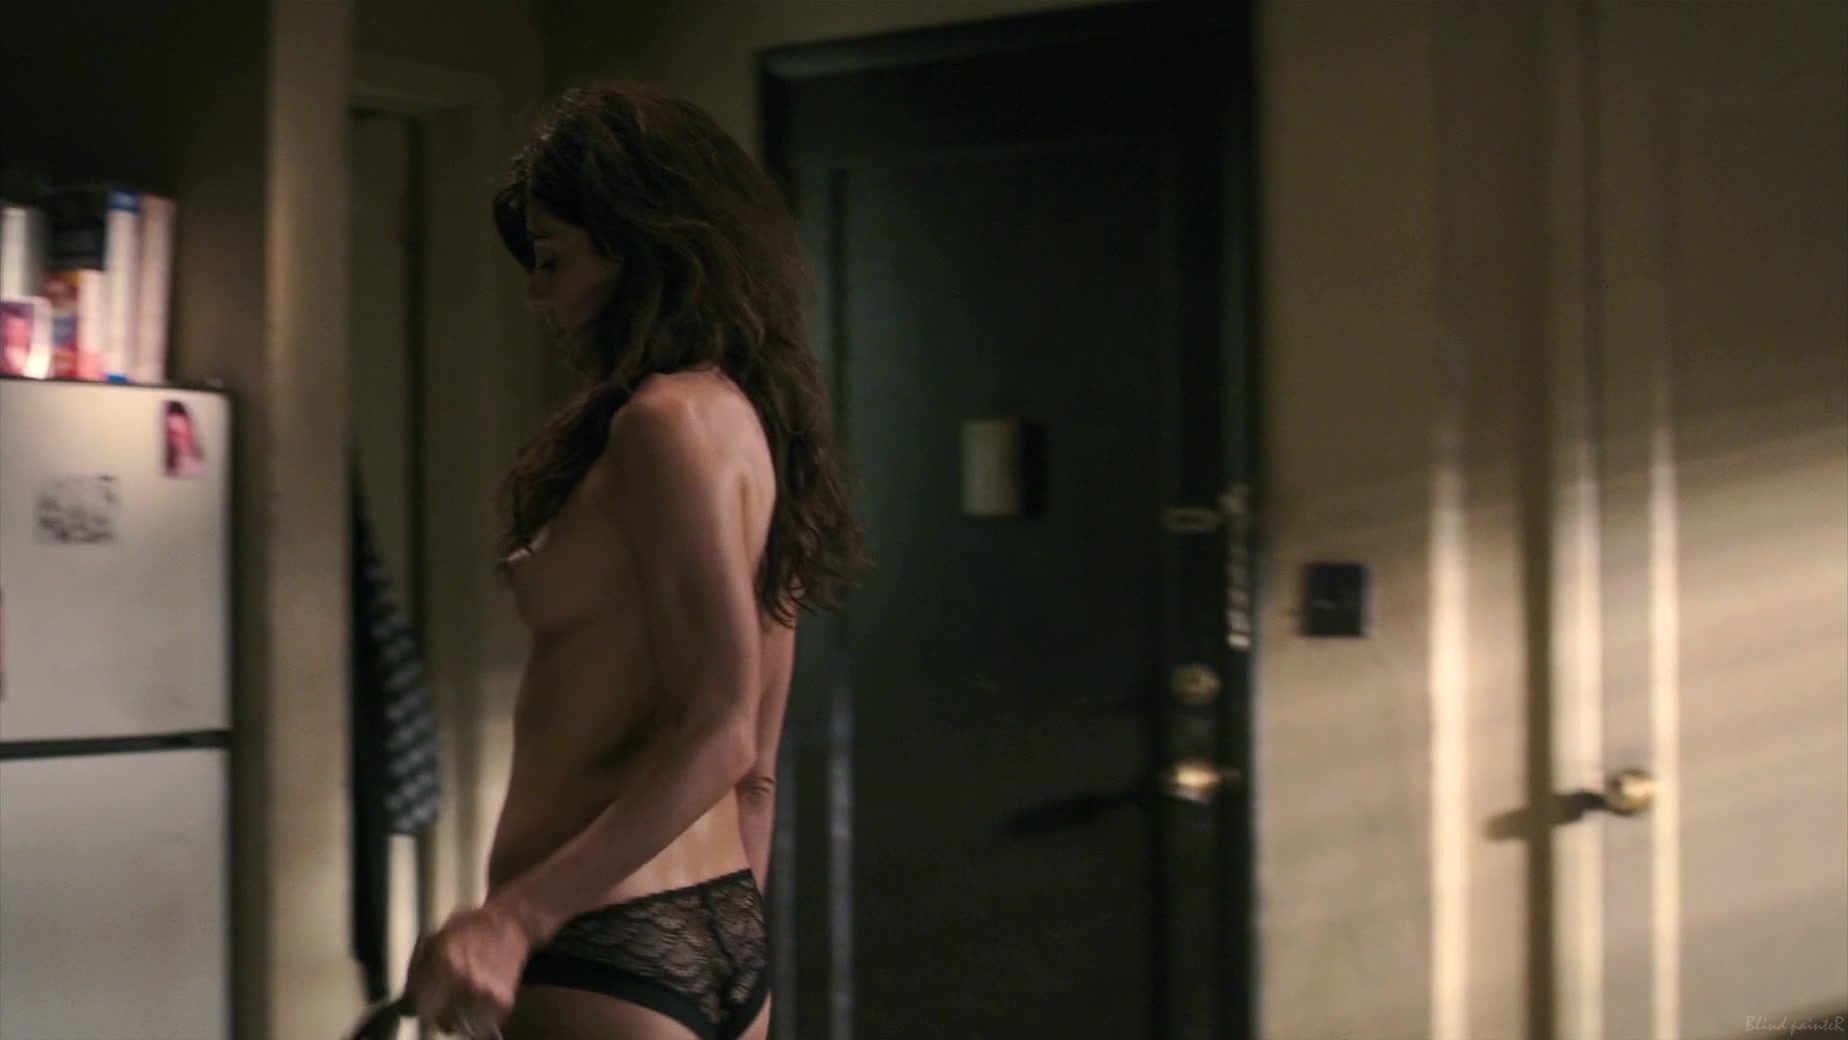 family tv shows, sexy, Celebrity, marisa tomei, nude, naked, satan, you, nu...